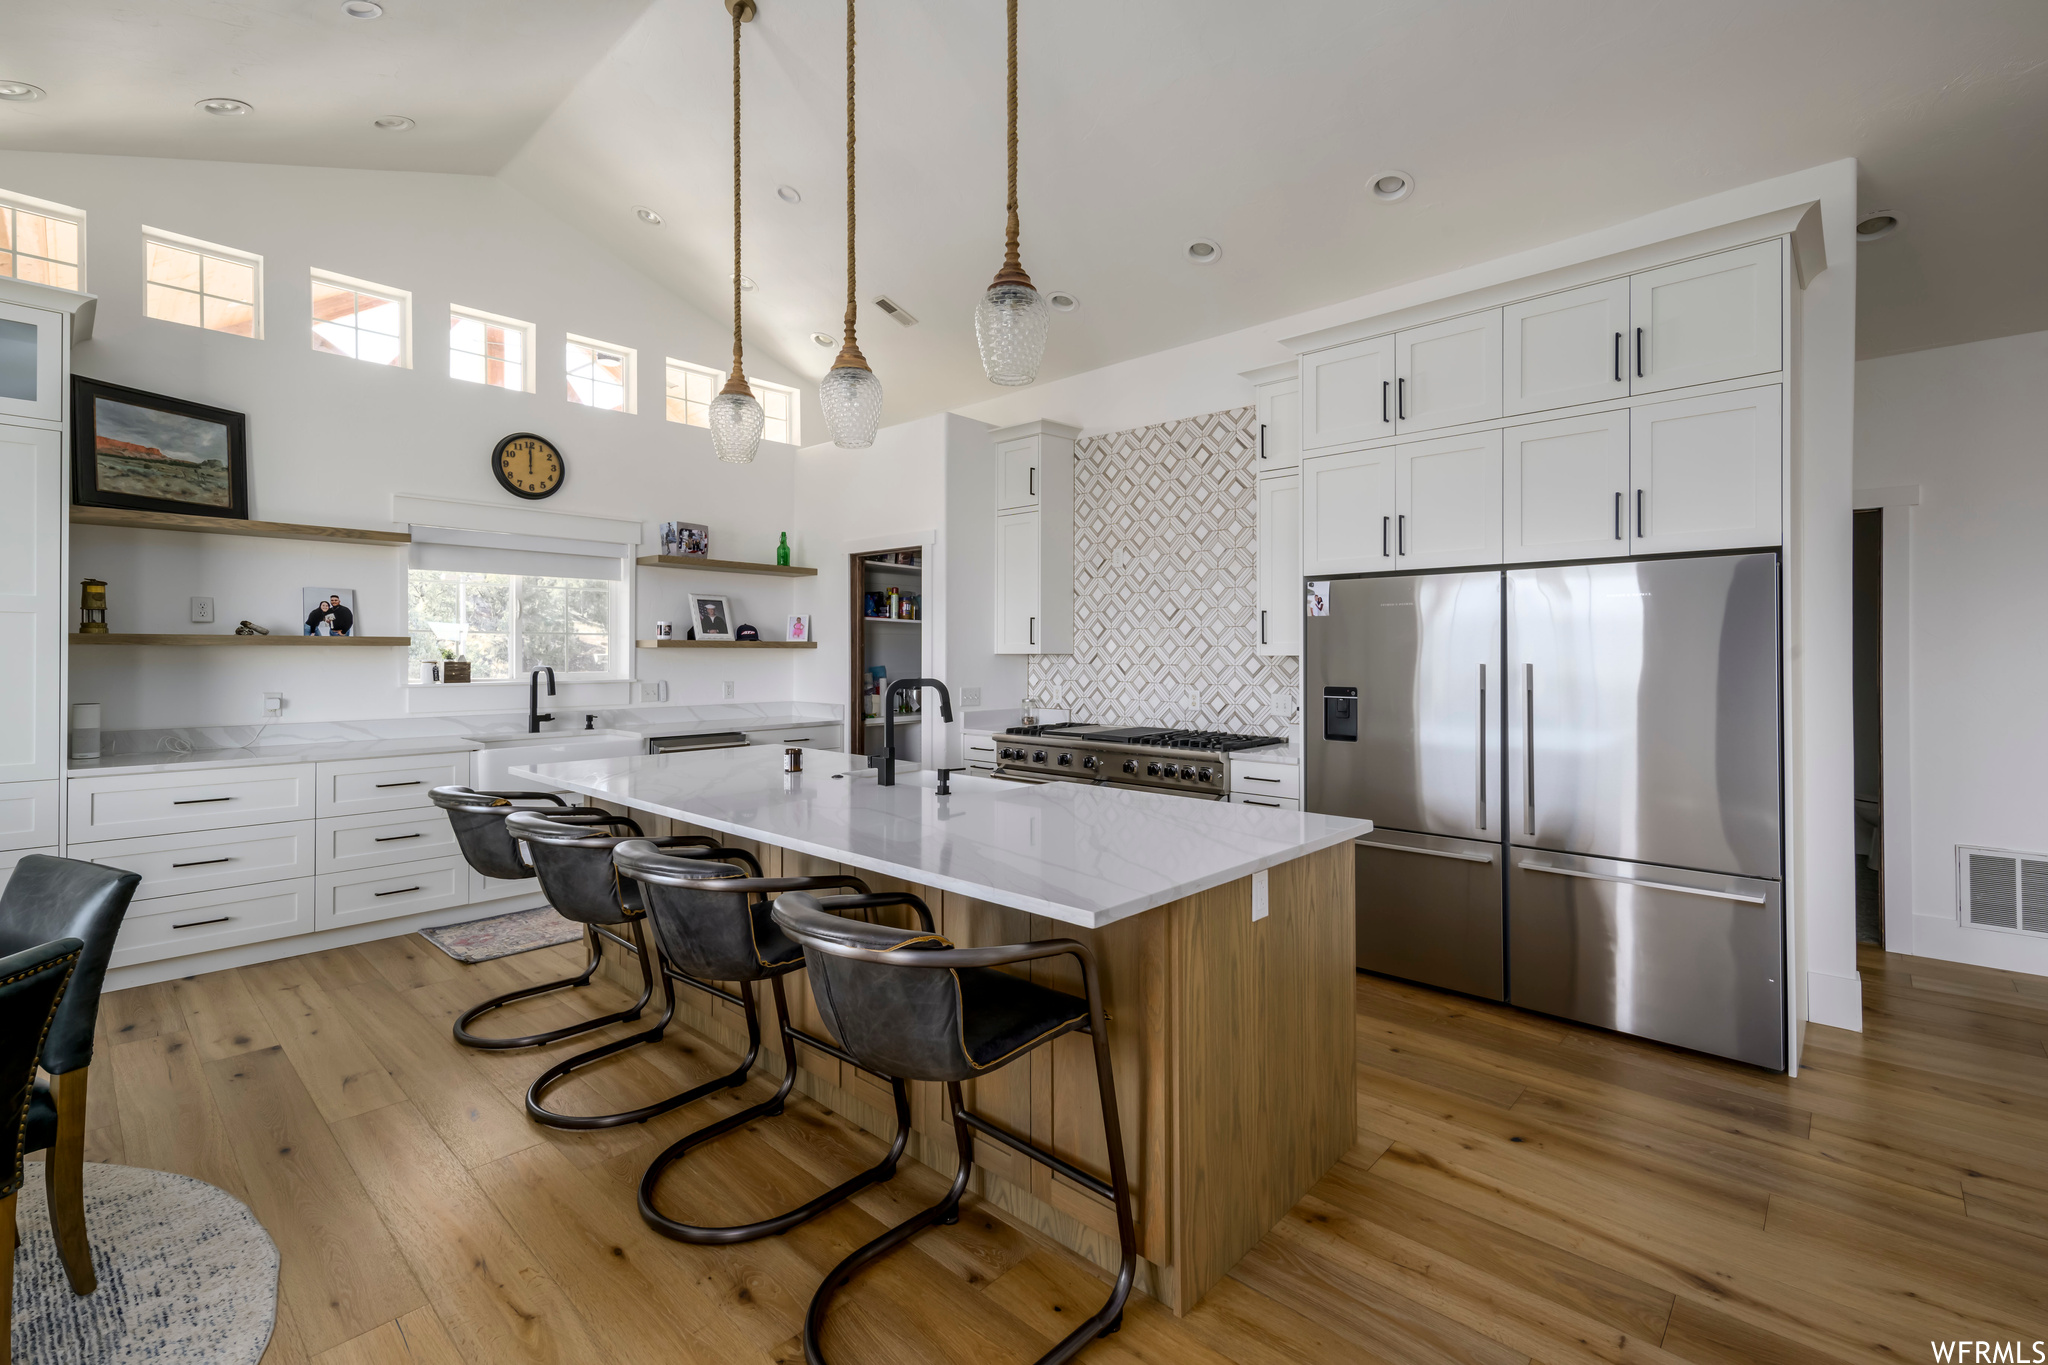 Kitchen with light wood-type flooring, a kitchen island with sink, white cabinetry, and appliances with stainless steel finishes